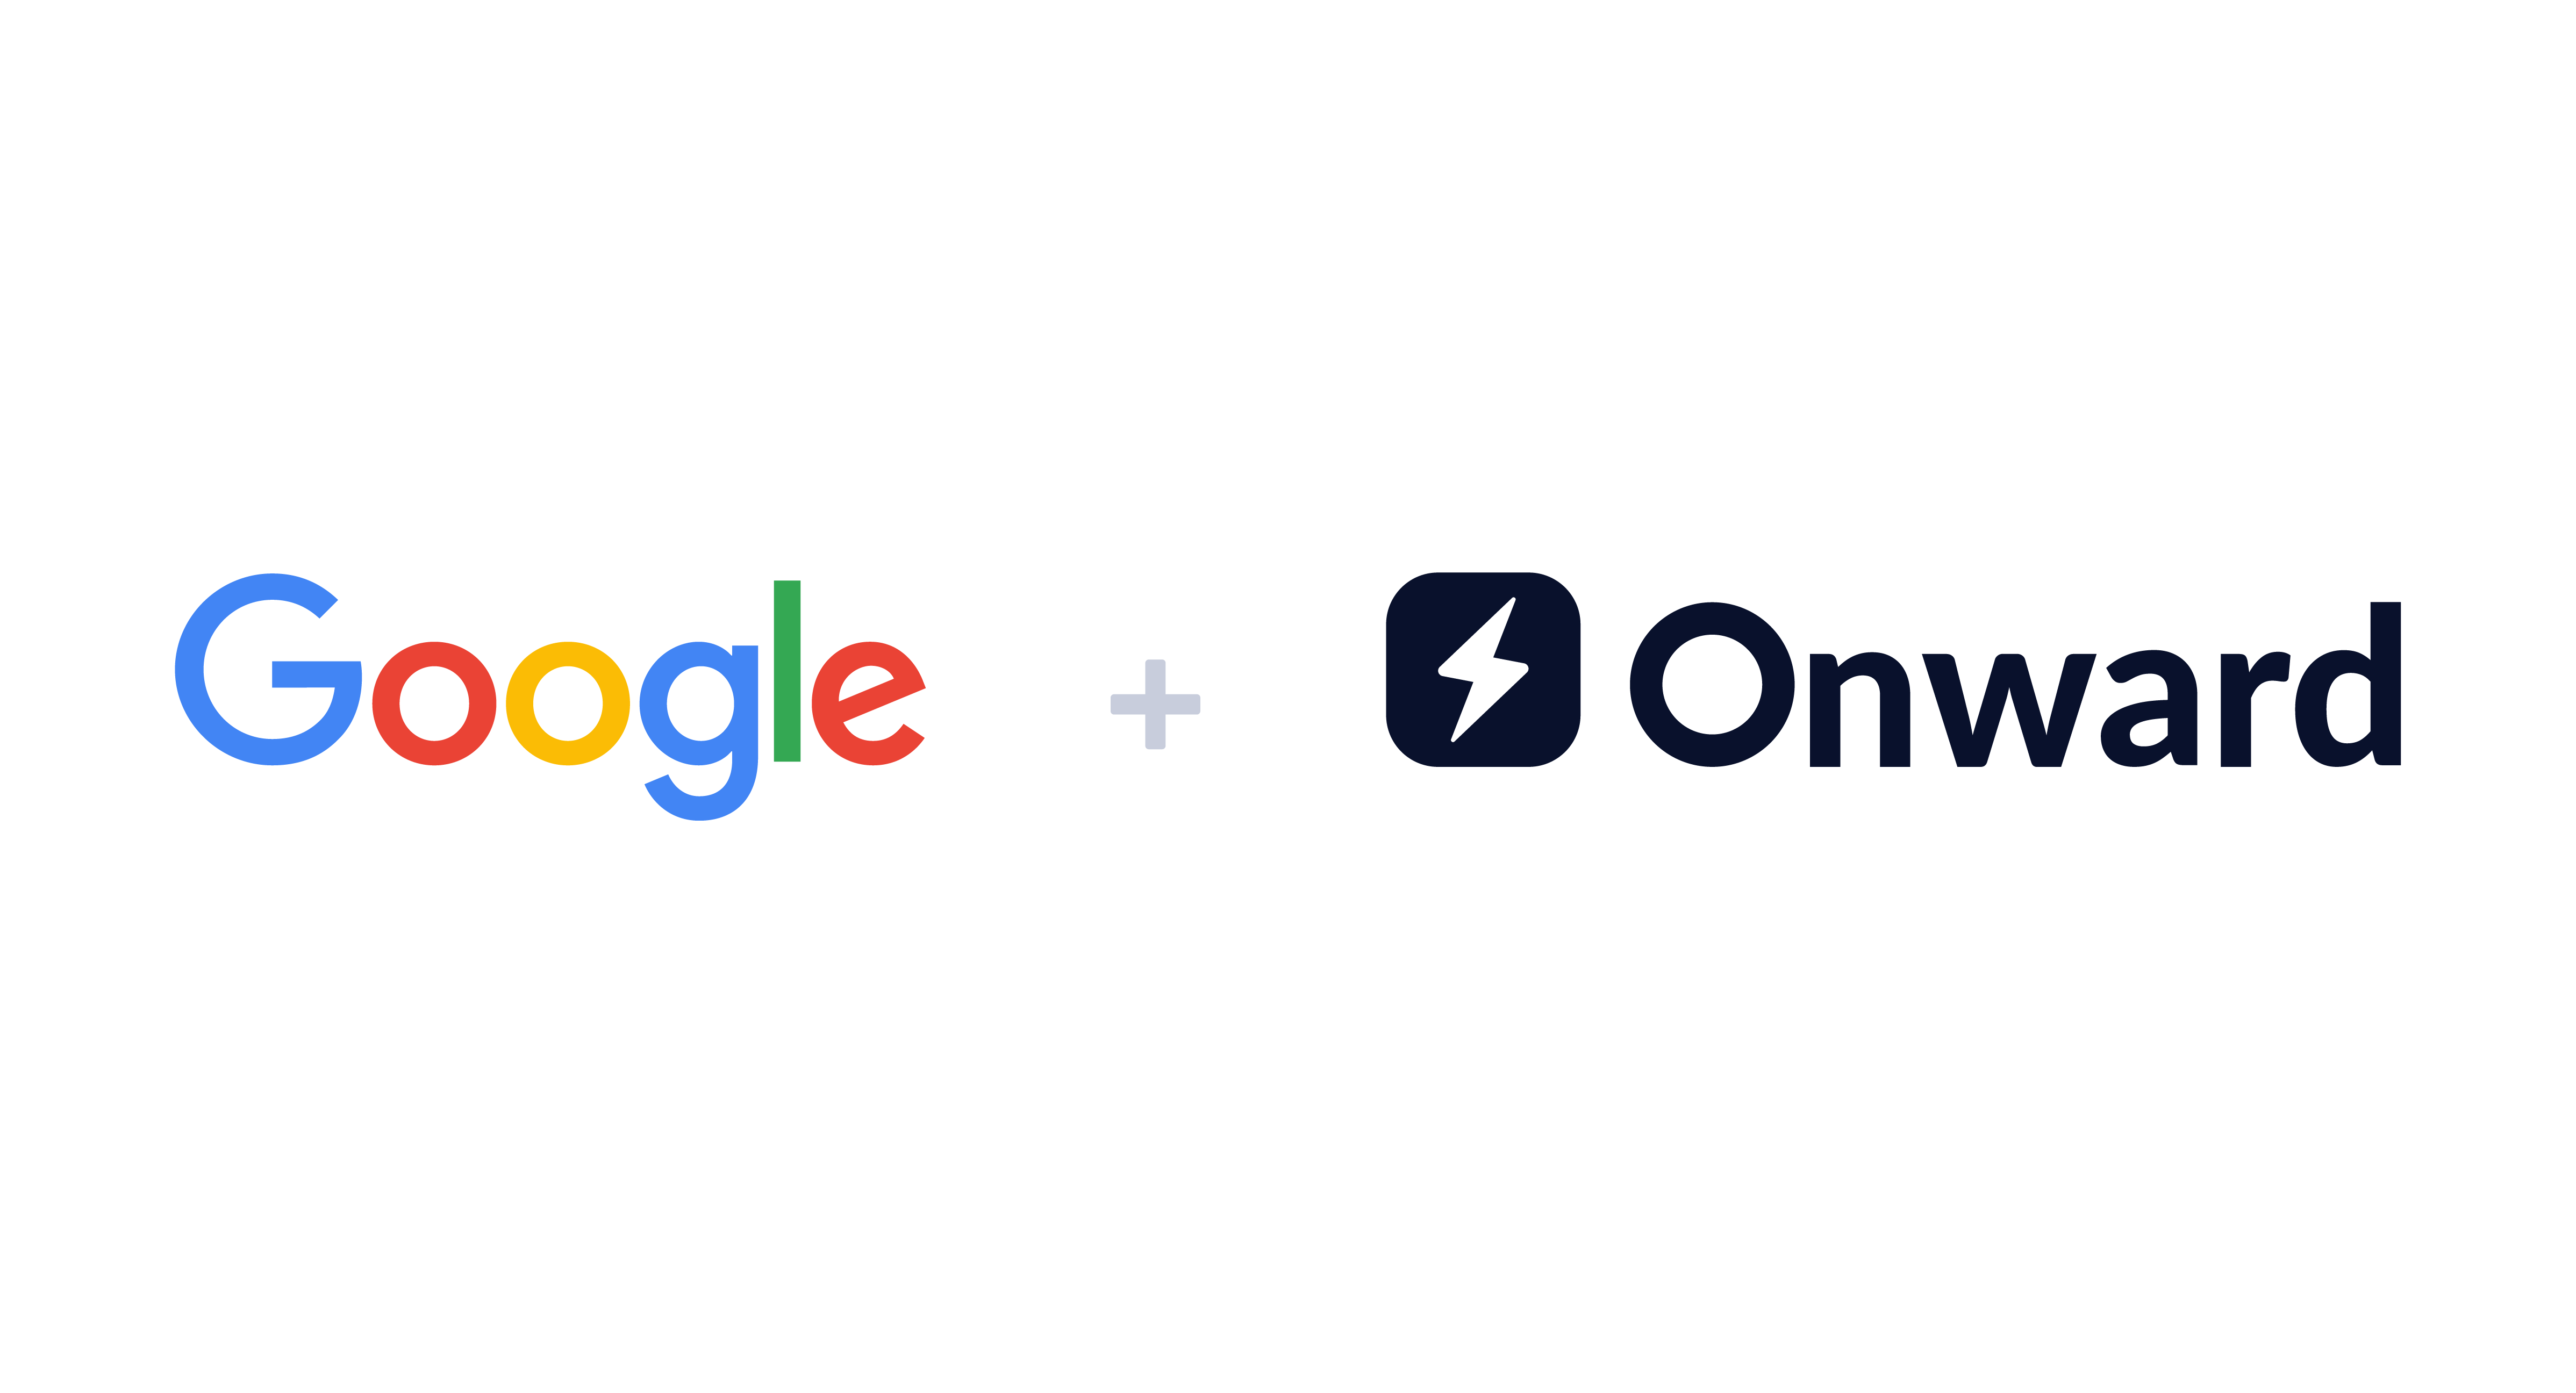 Onward Logo - In apparent acquihire, Google acquires automation platform startup